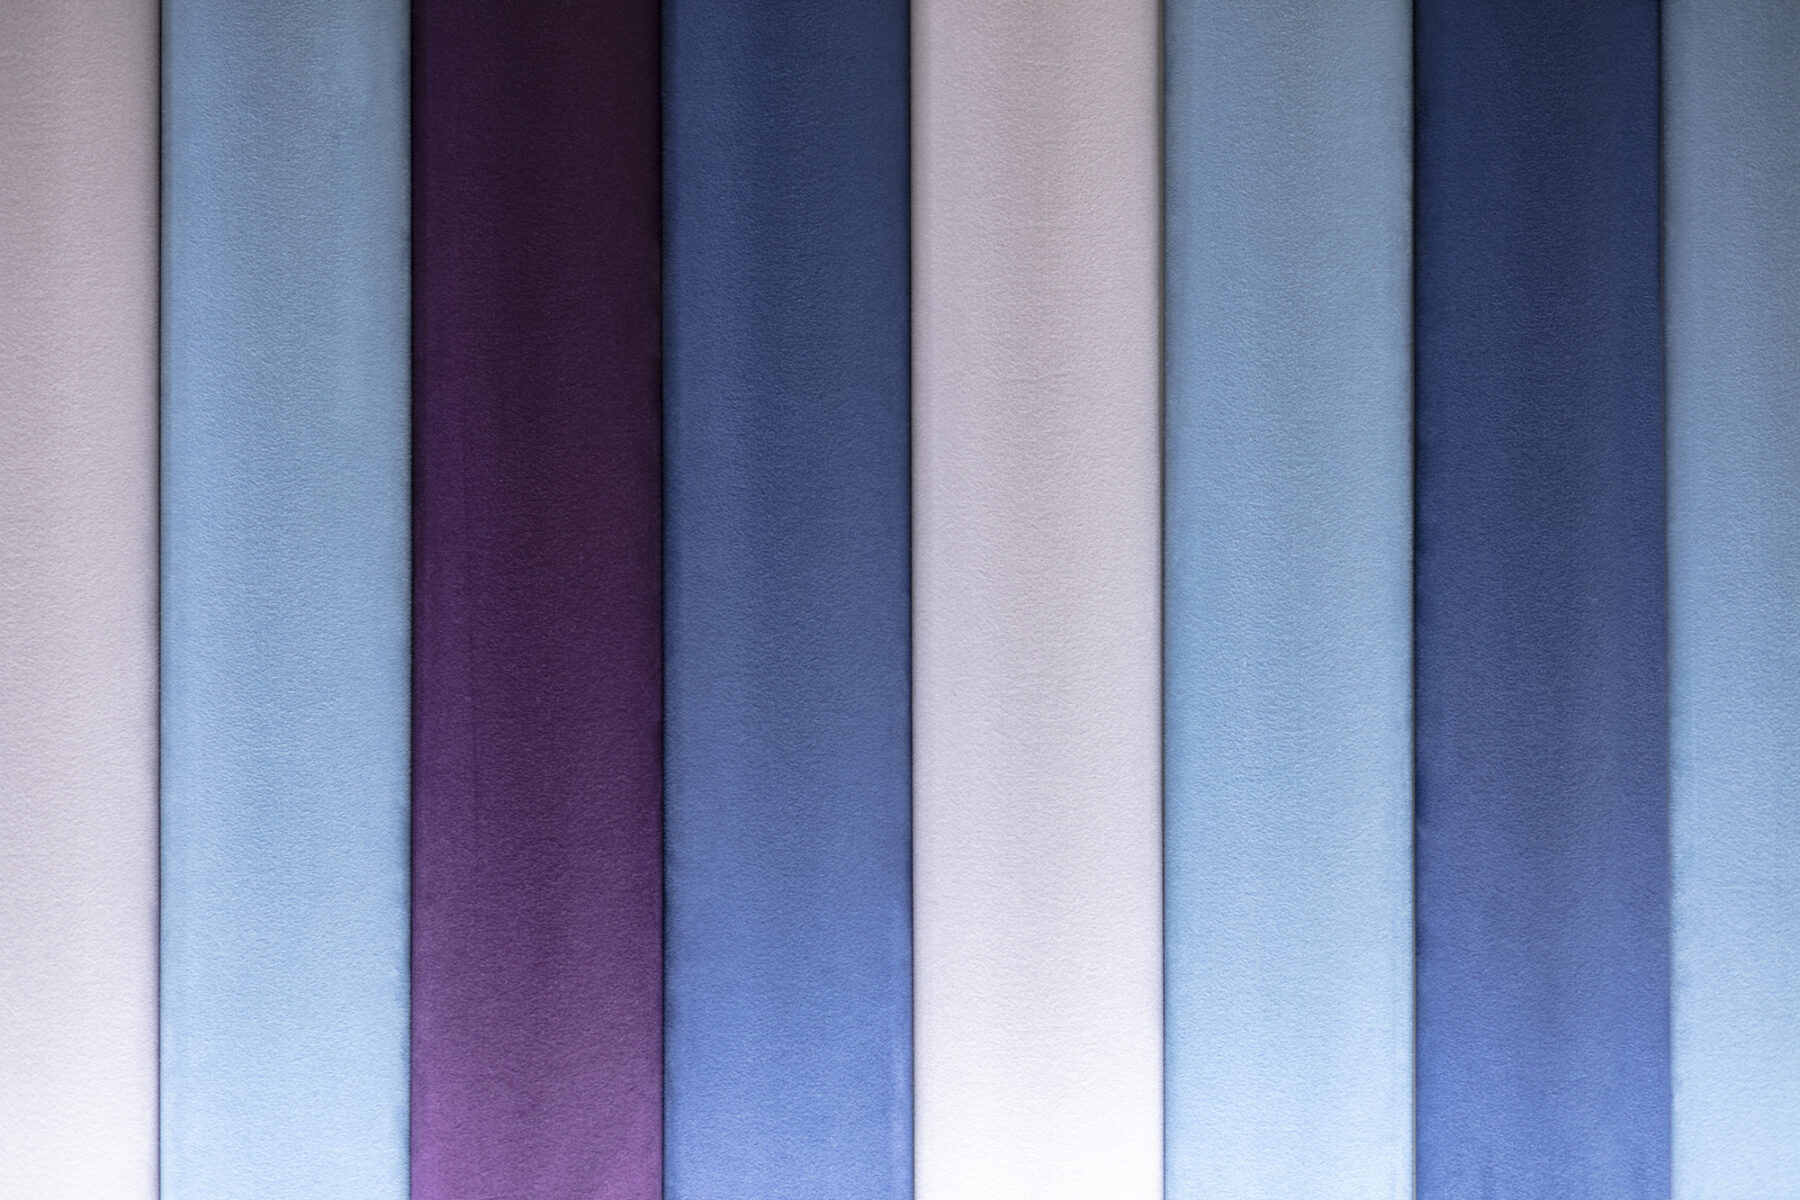 a close-up shot of the wall's upholstered stripes. the stripes are varying shades of blue and purple.